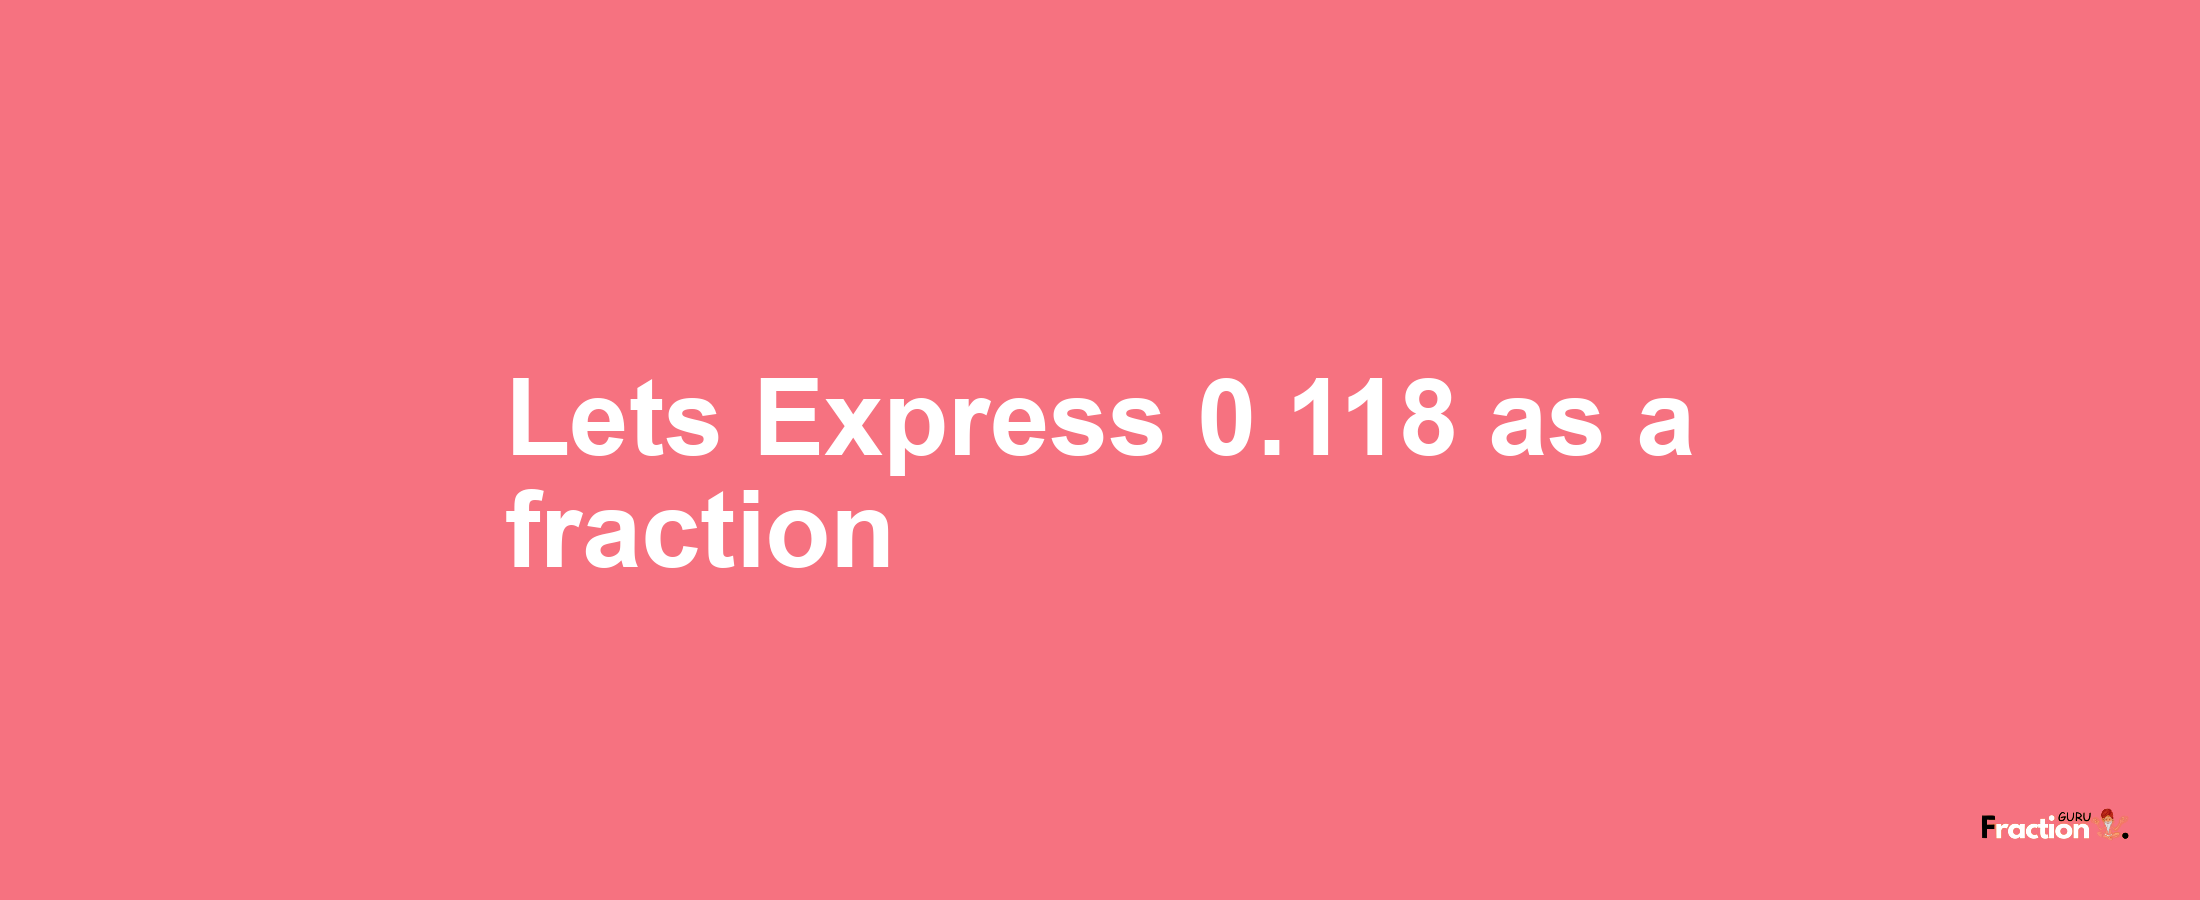 Lets Express 0.118 as afraction